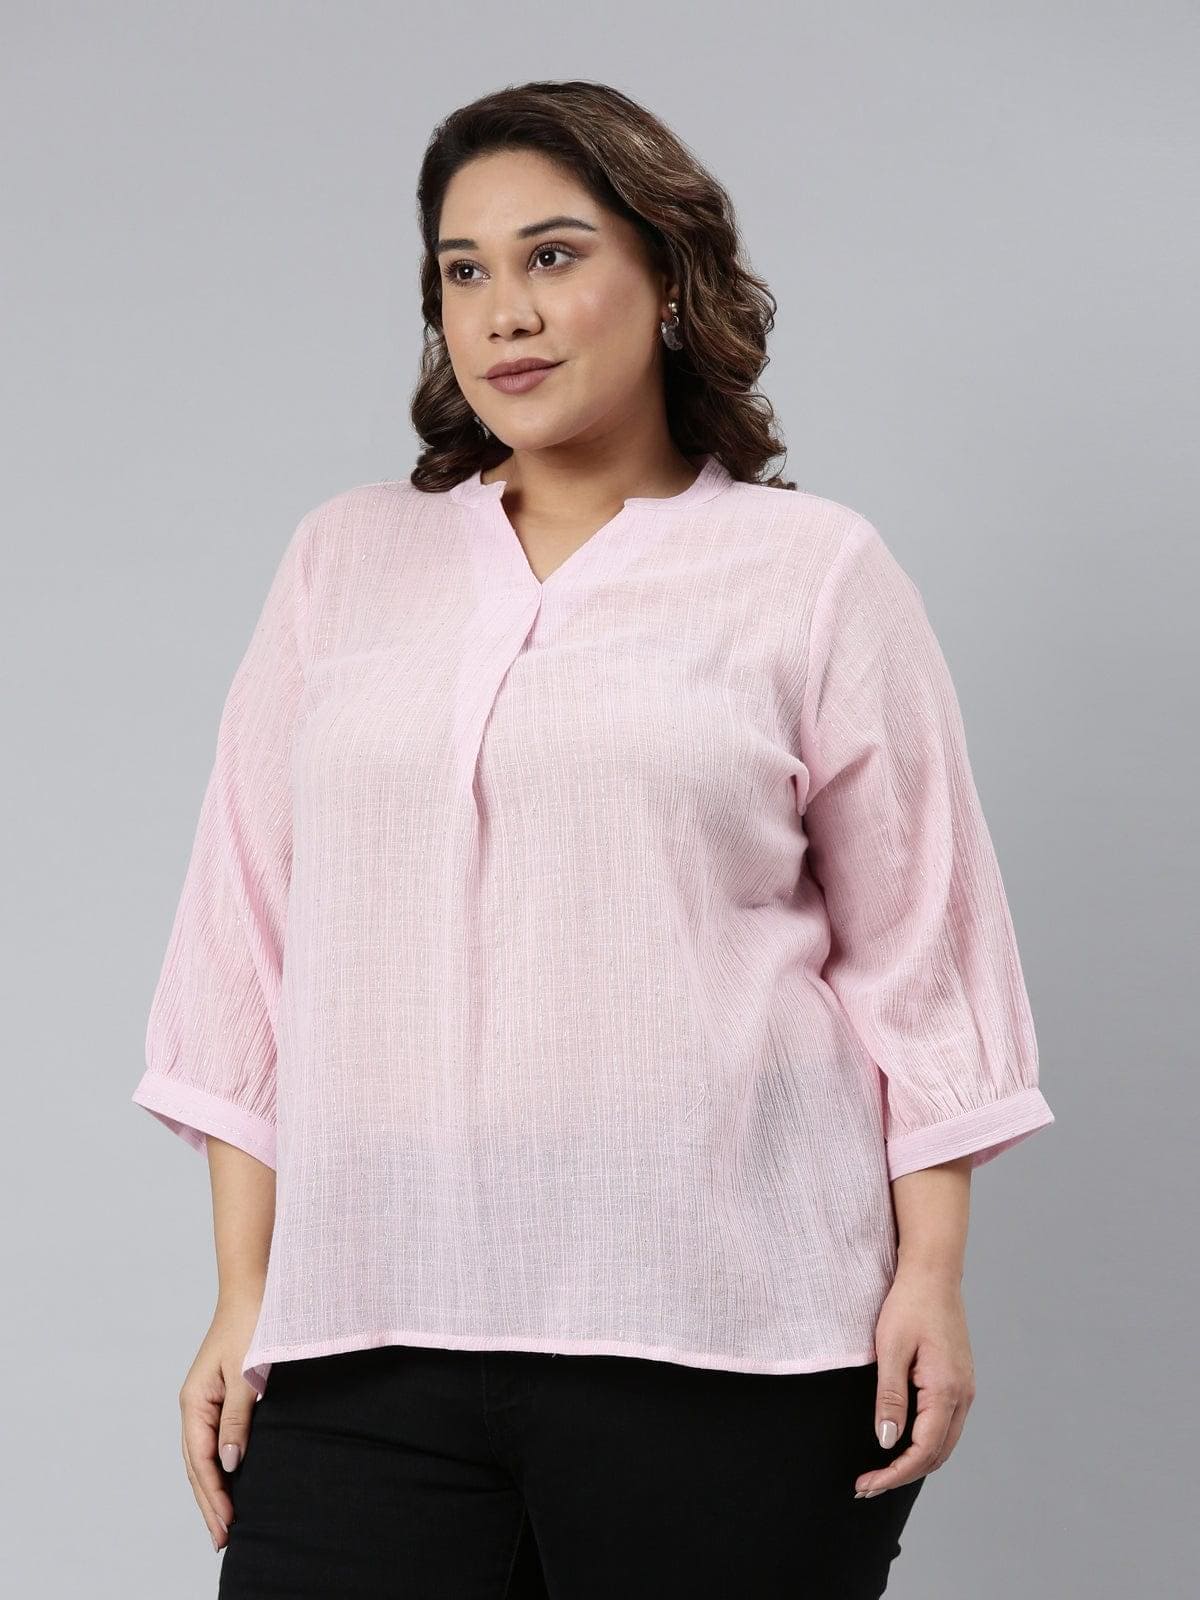 buy TheShaili PINK TOP at best prices   online India